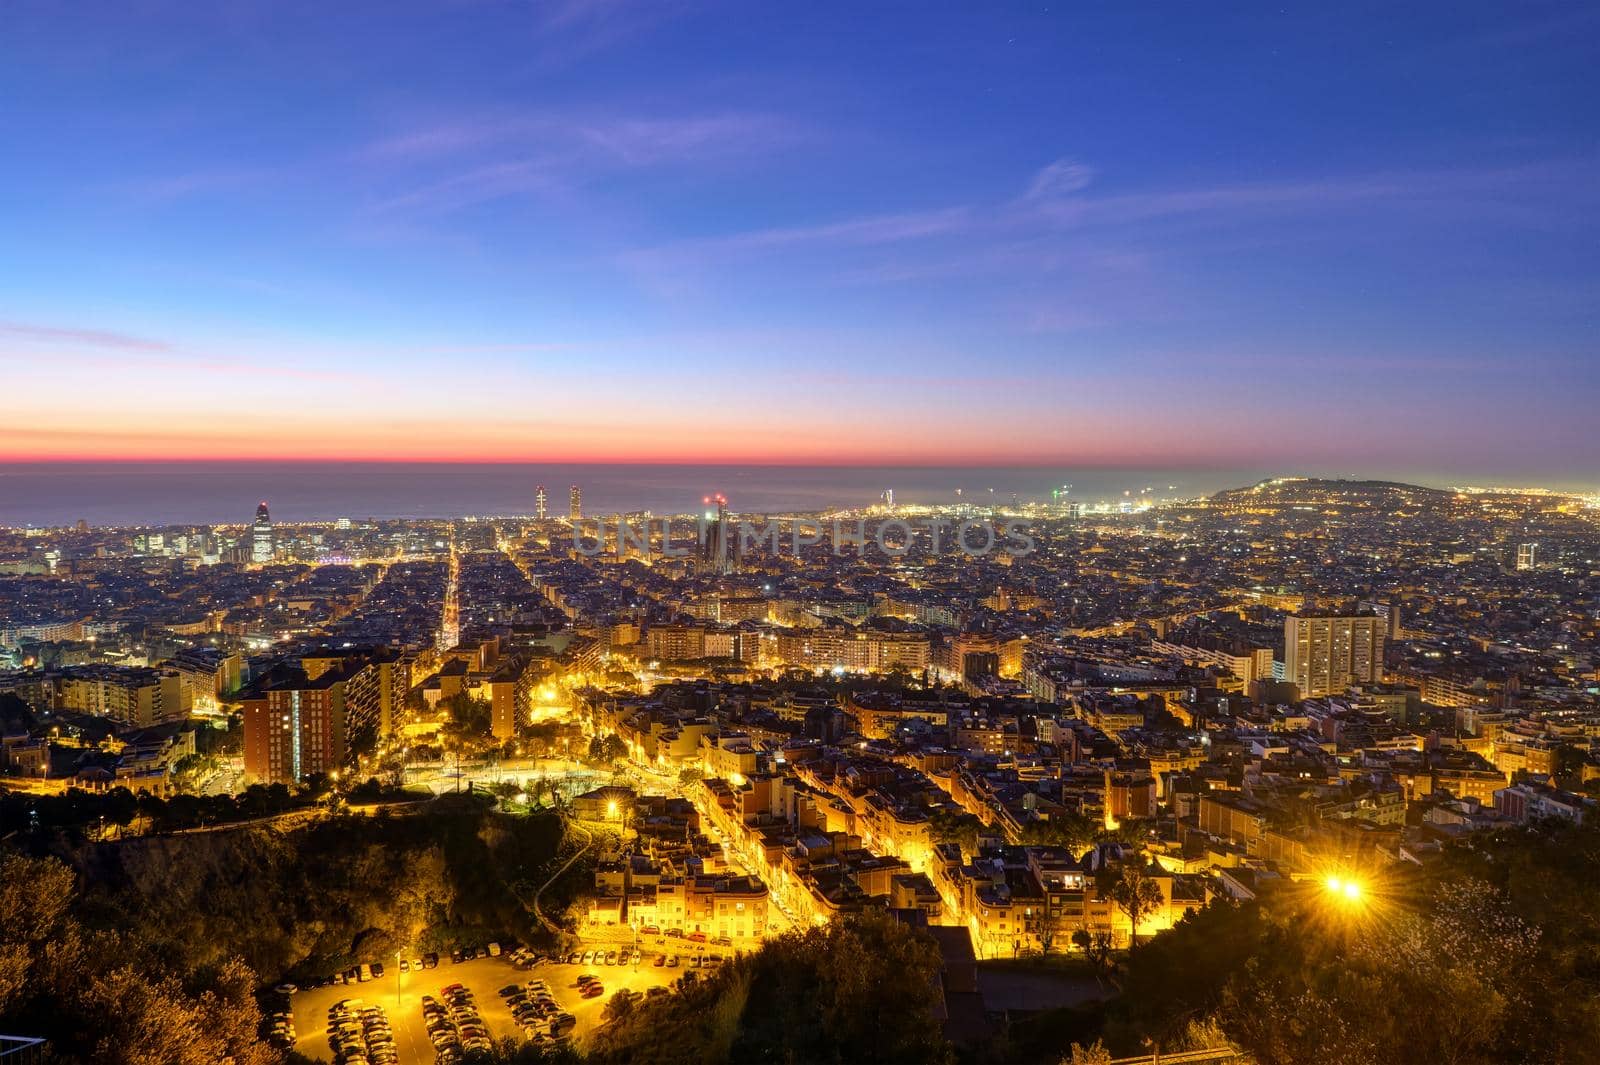 View over the lights of Barcelona before sunrise